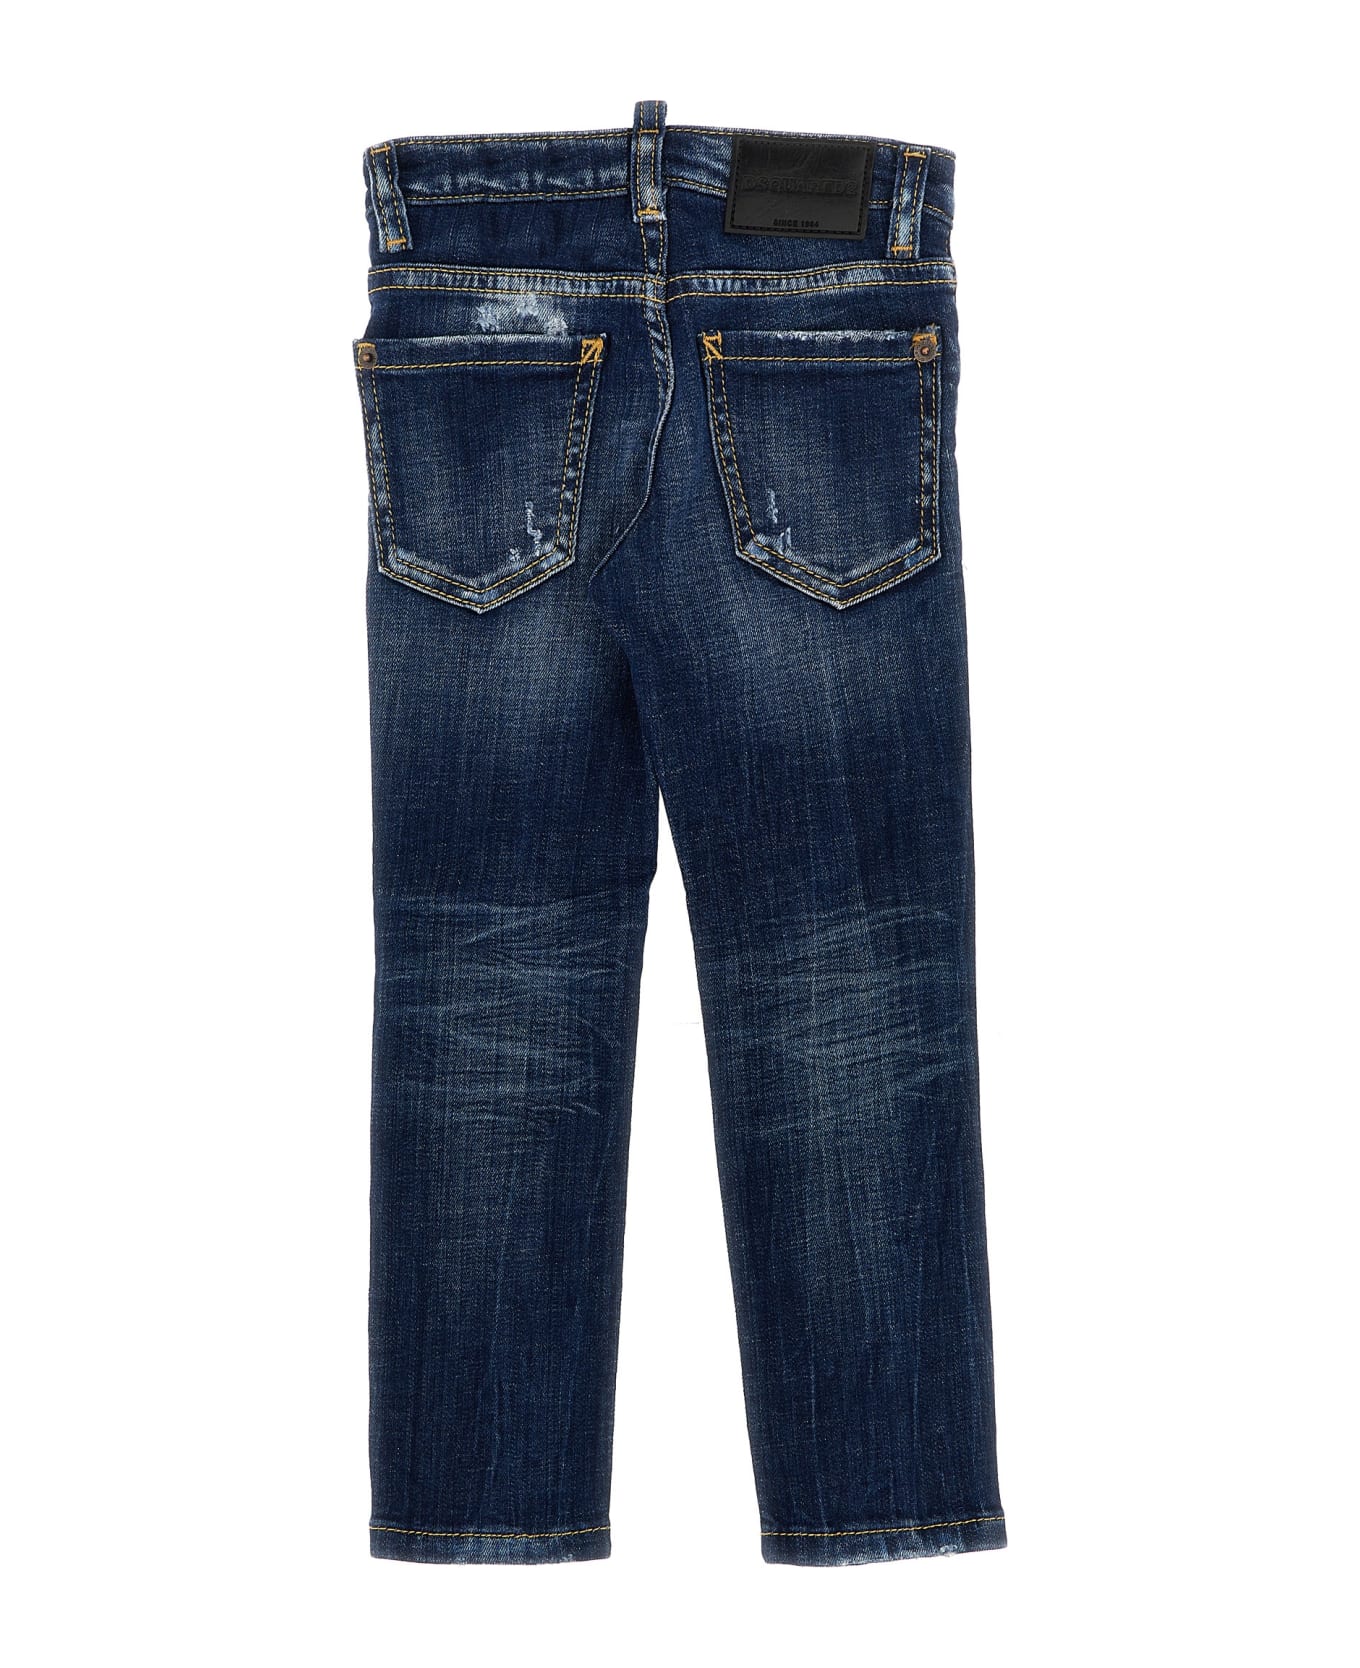 Dsquared2 Jeans 'cool Guy' - Blue ボトムス